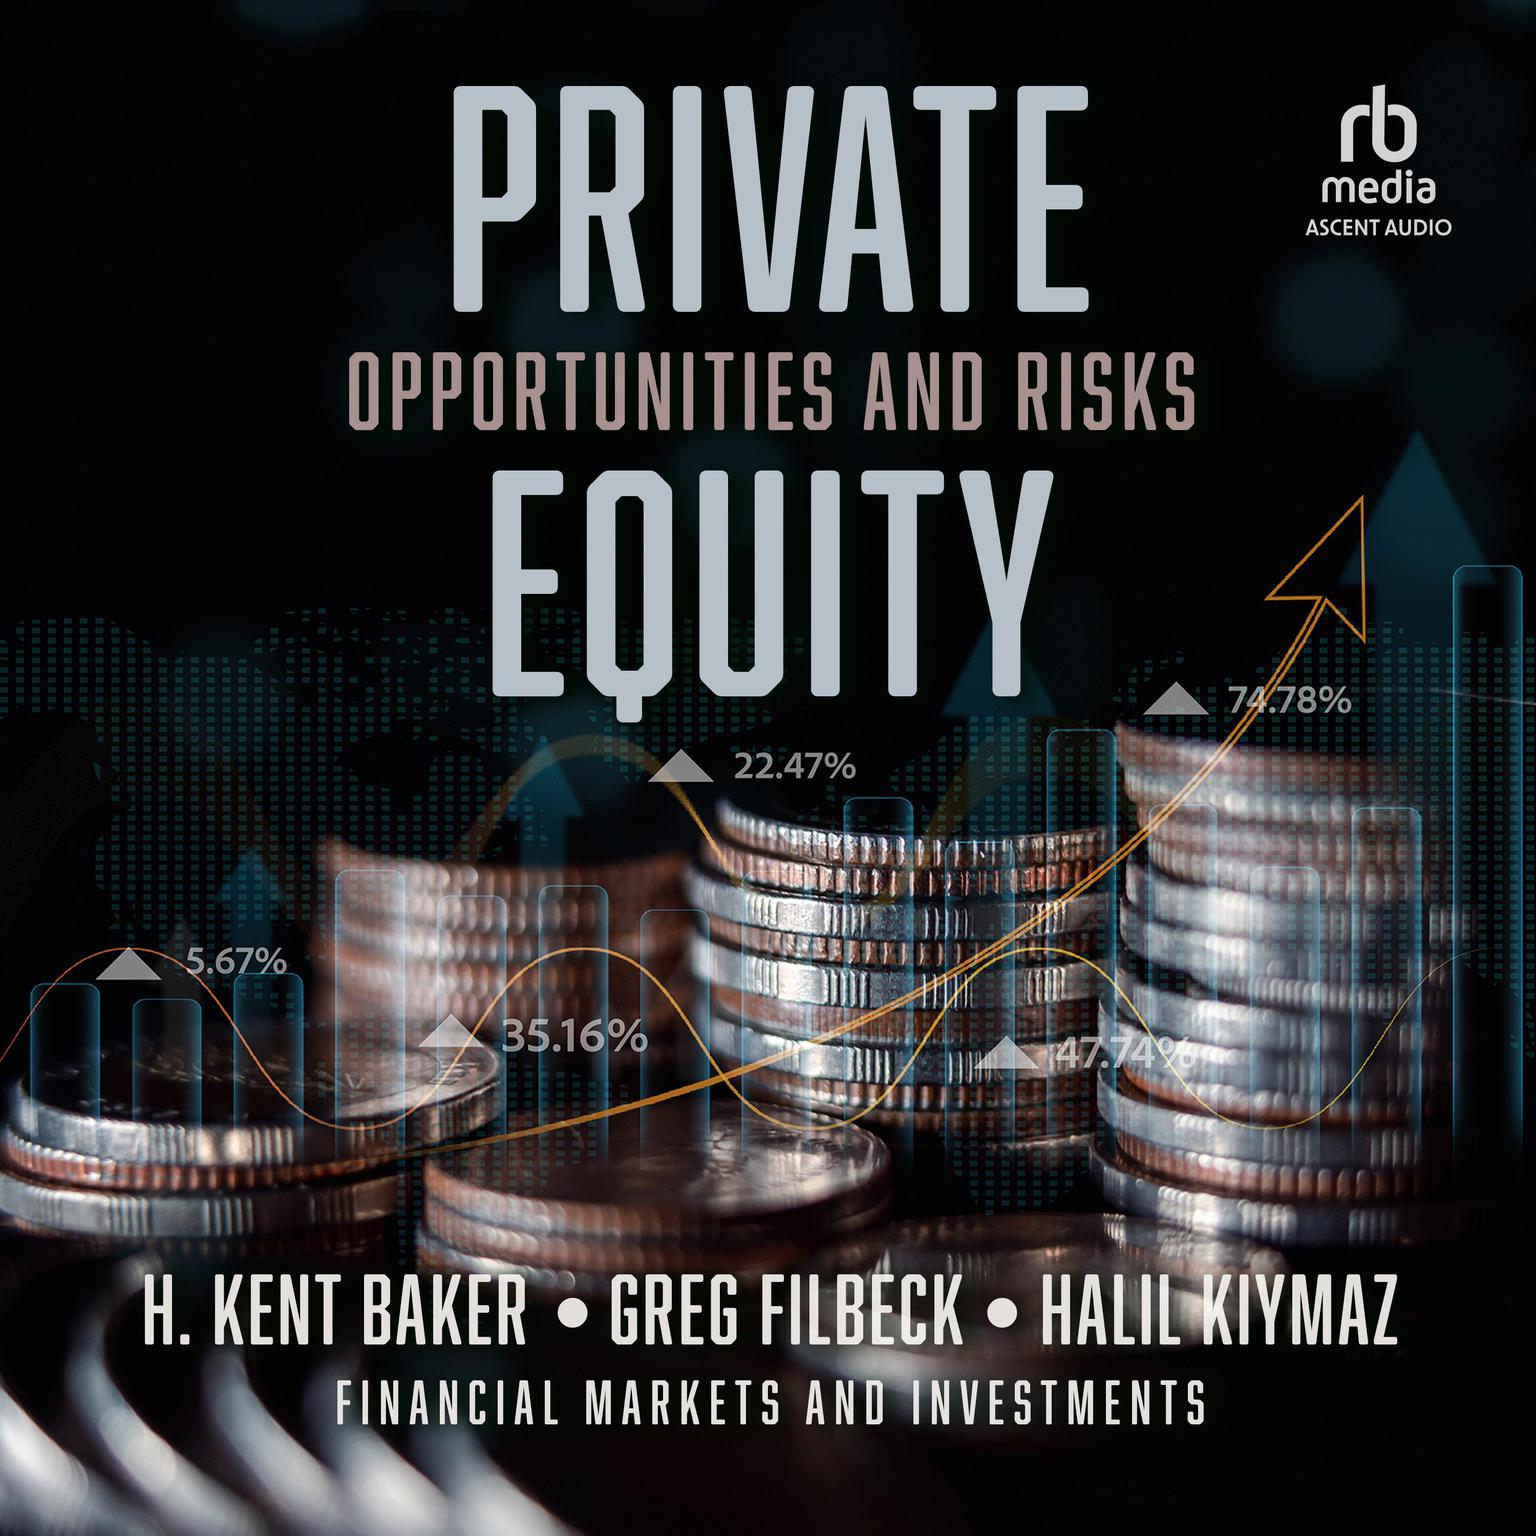 Private Equity: Opportunities and Risks (Financial Markets and Investments) 1st Edition Audiobook, by H. Kent Baker